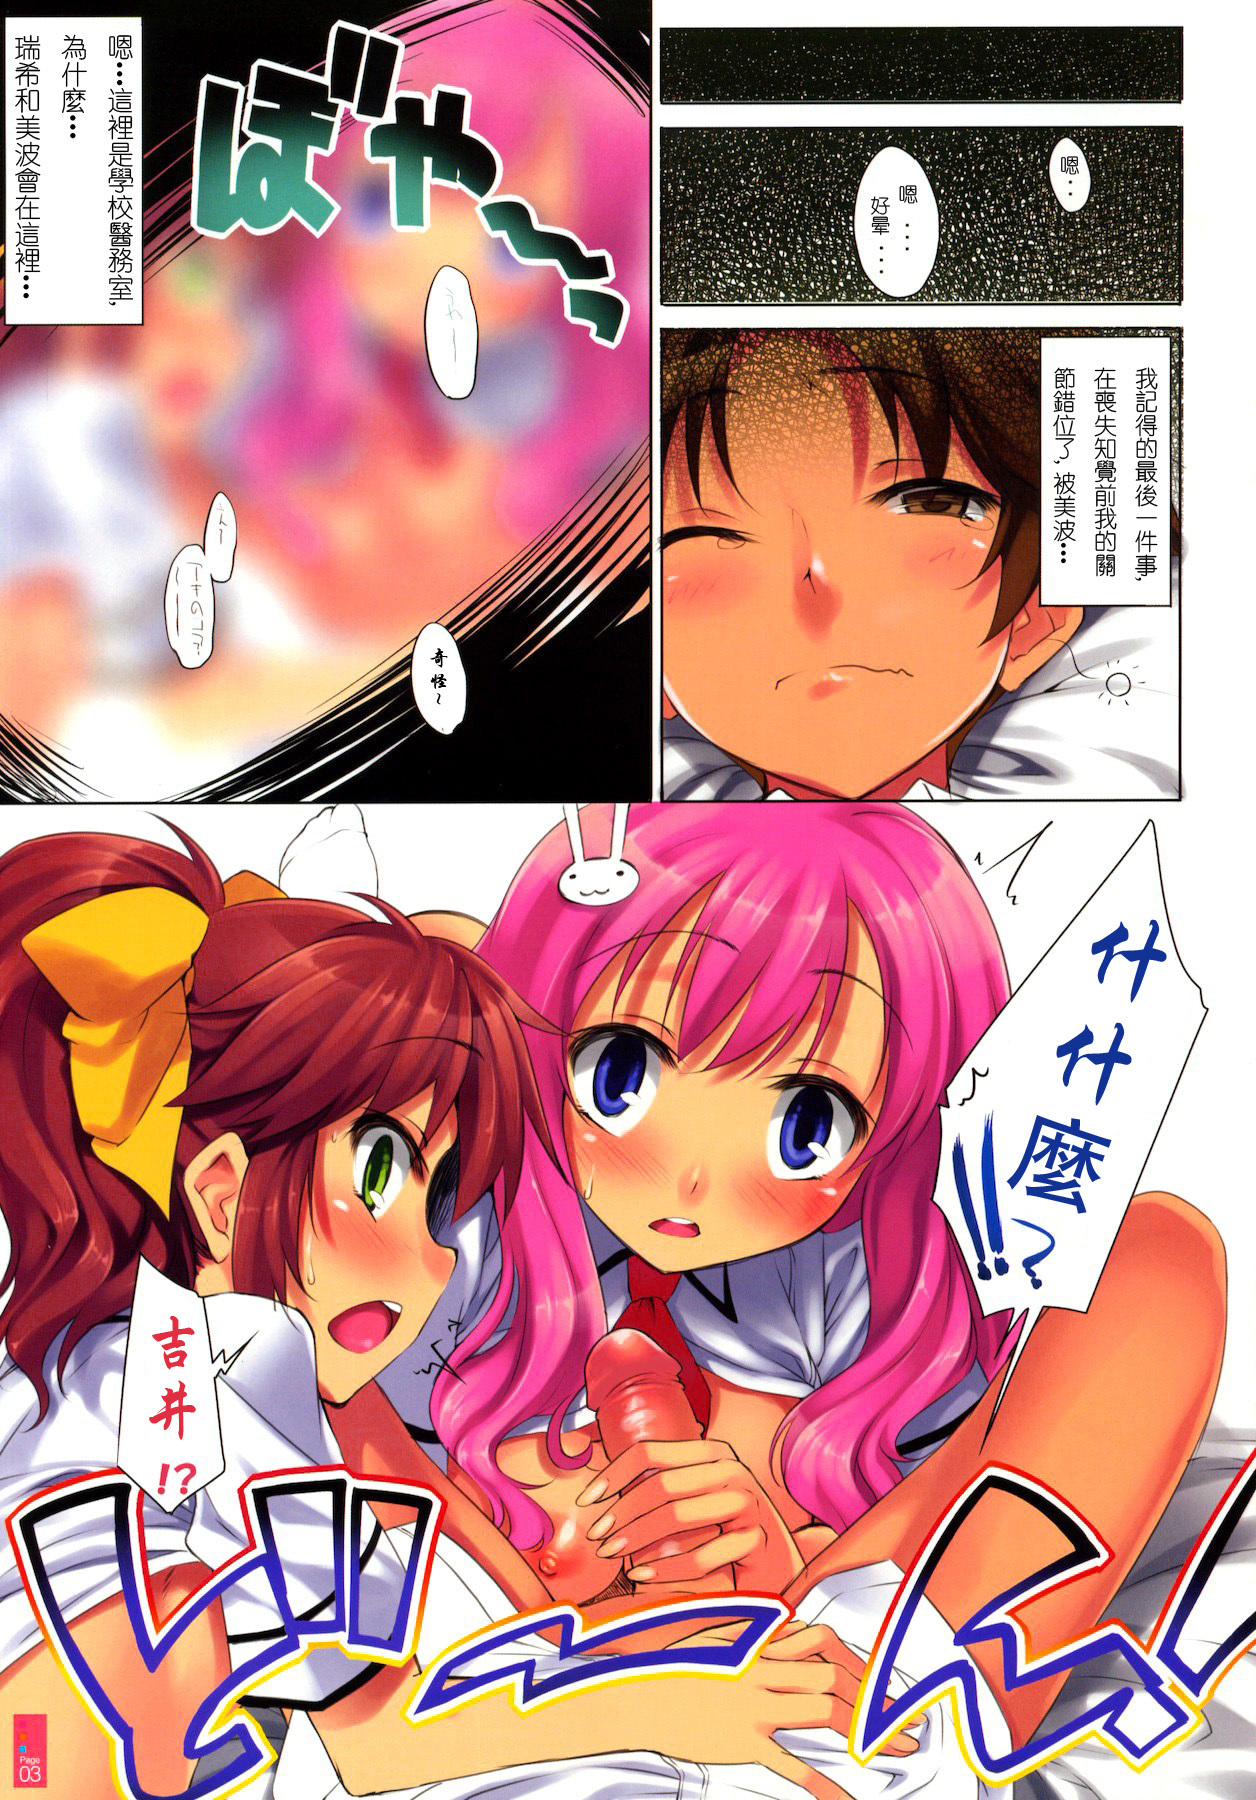 (COMIC1☆4) [Clesta (Cle Masahiro)] CL-orz 9 (Baka to Test to Shoukanjuu) [Chinese] [个人汉化] [Decensored] page 4 full